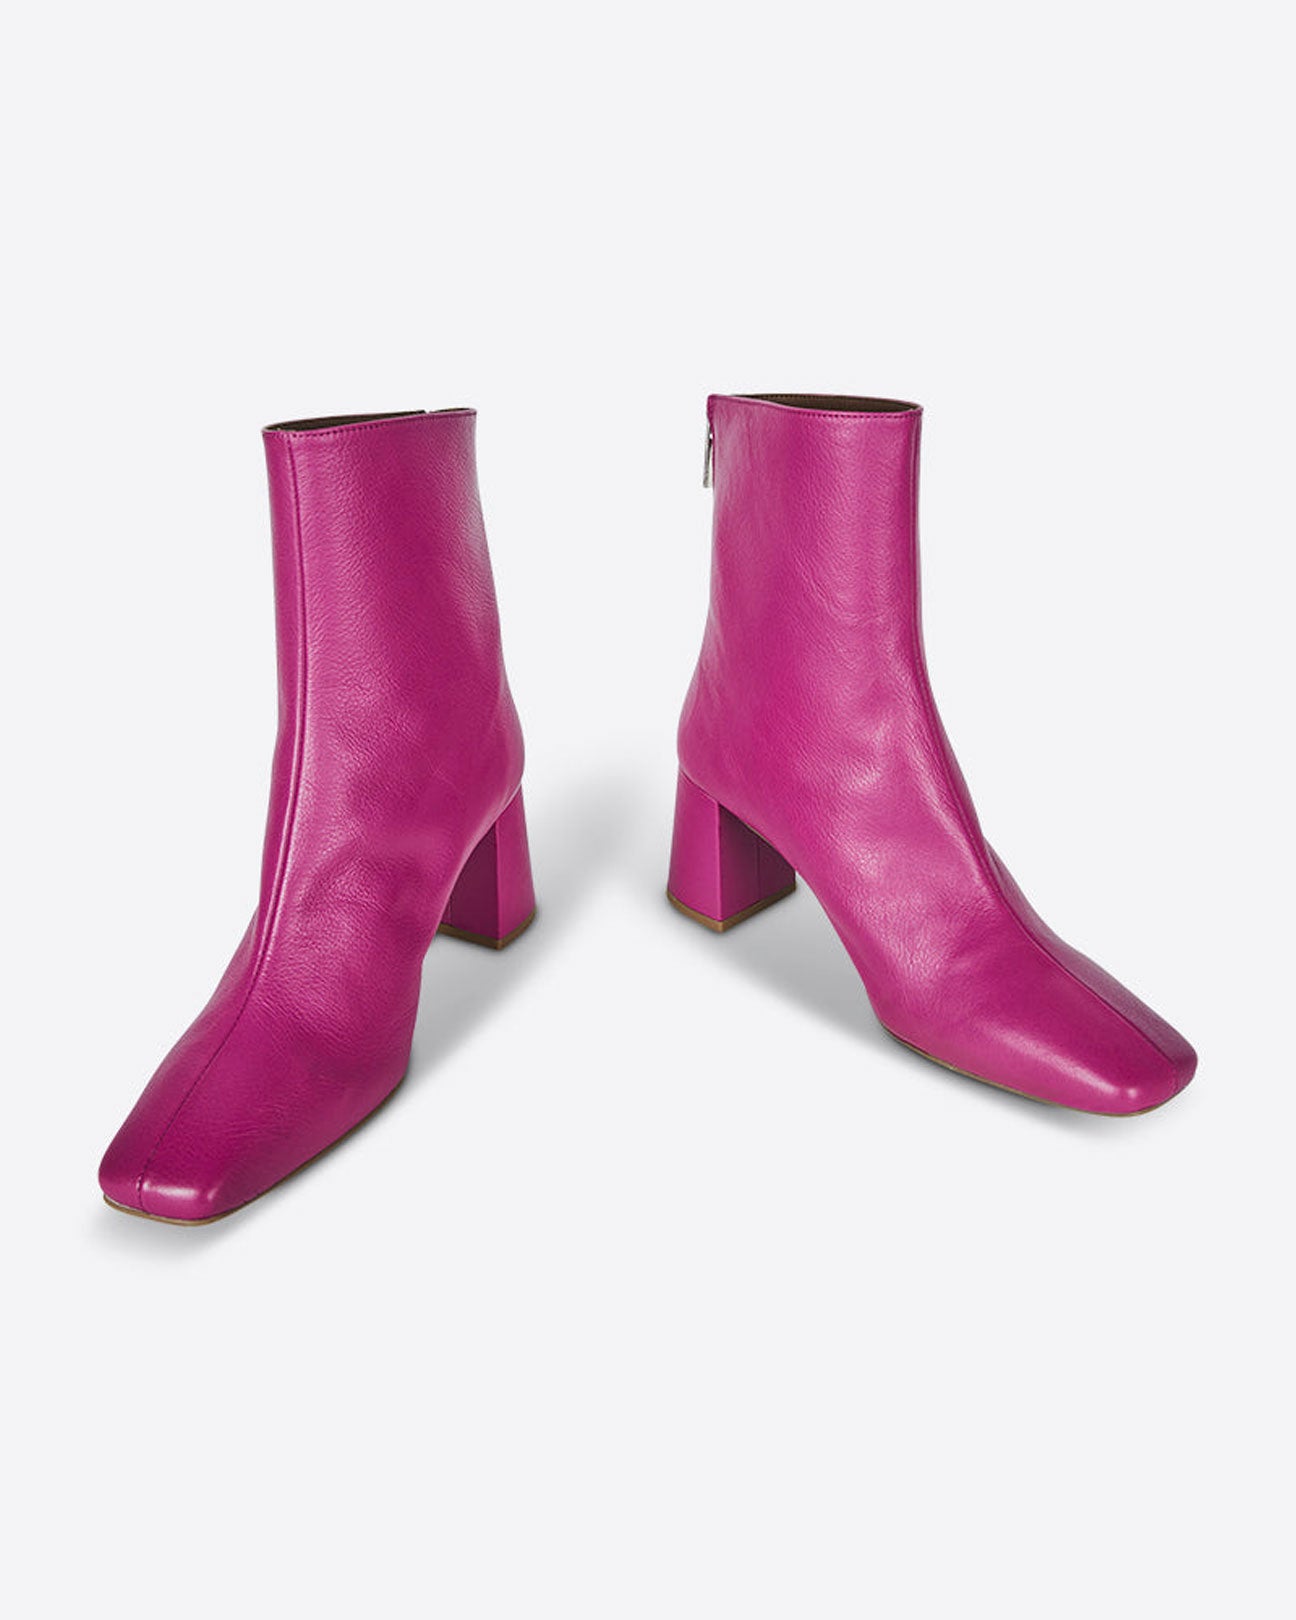 INTENTIONALLY BLANK Tabatha Leather Boots in Flamingo available at Lahn.shop